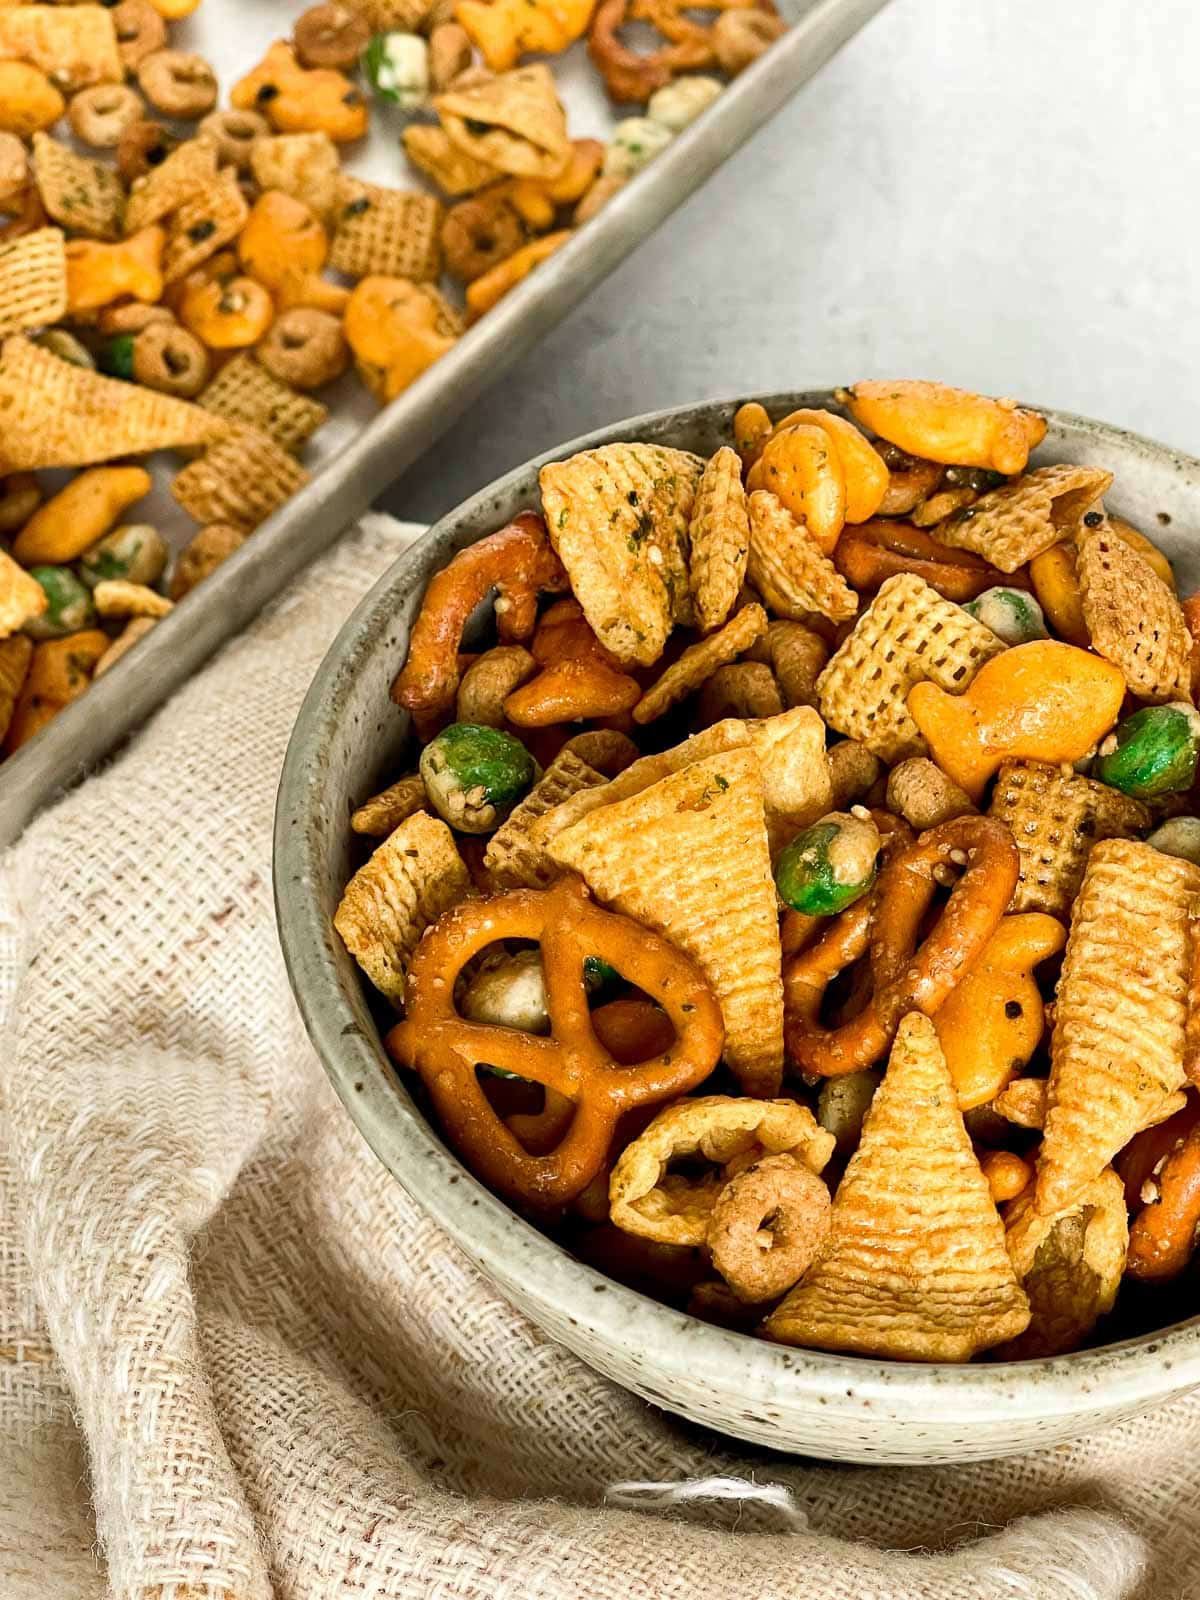 A bowl of Furikake chex mix with a linen napkin on the side and a baking tray in the background.